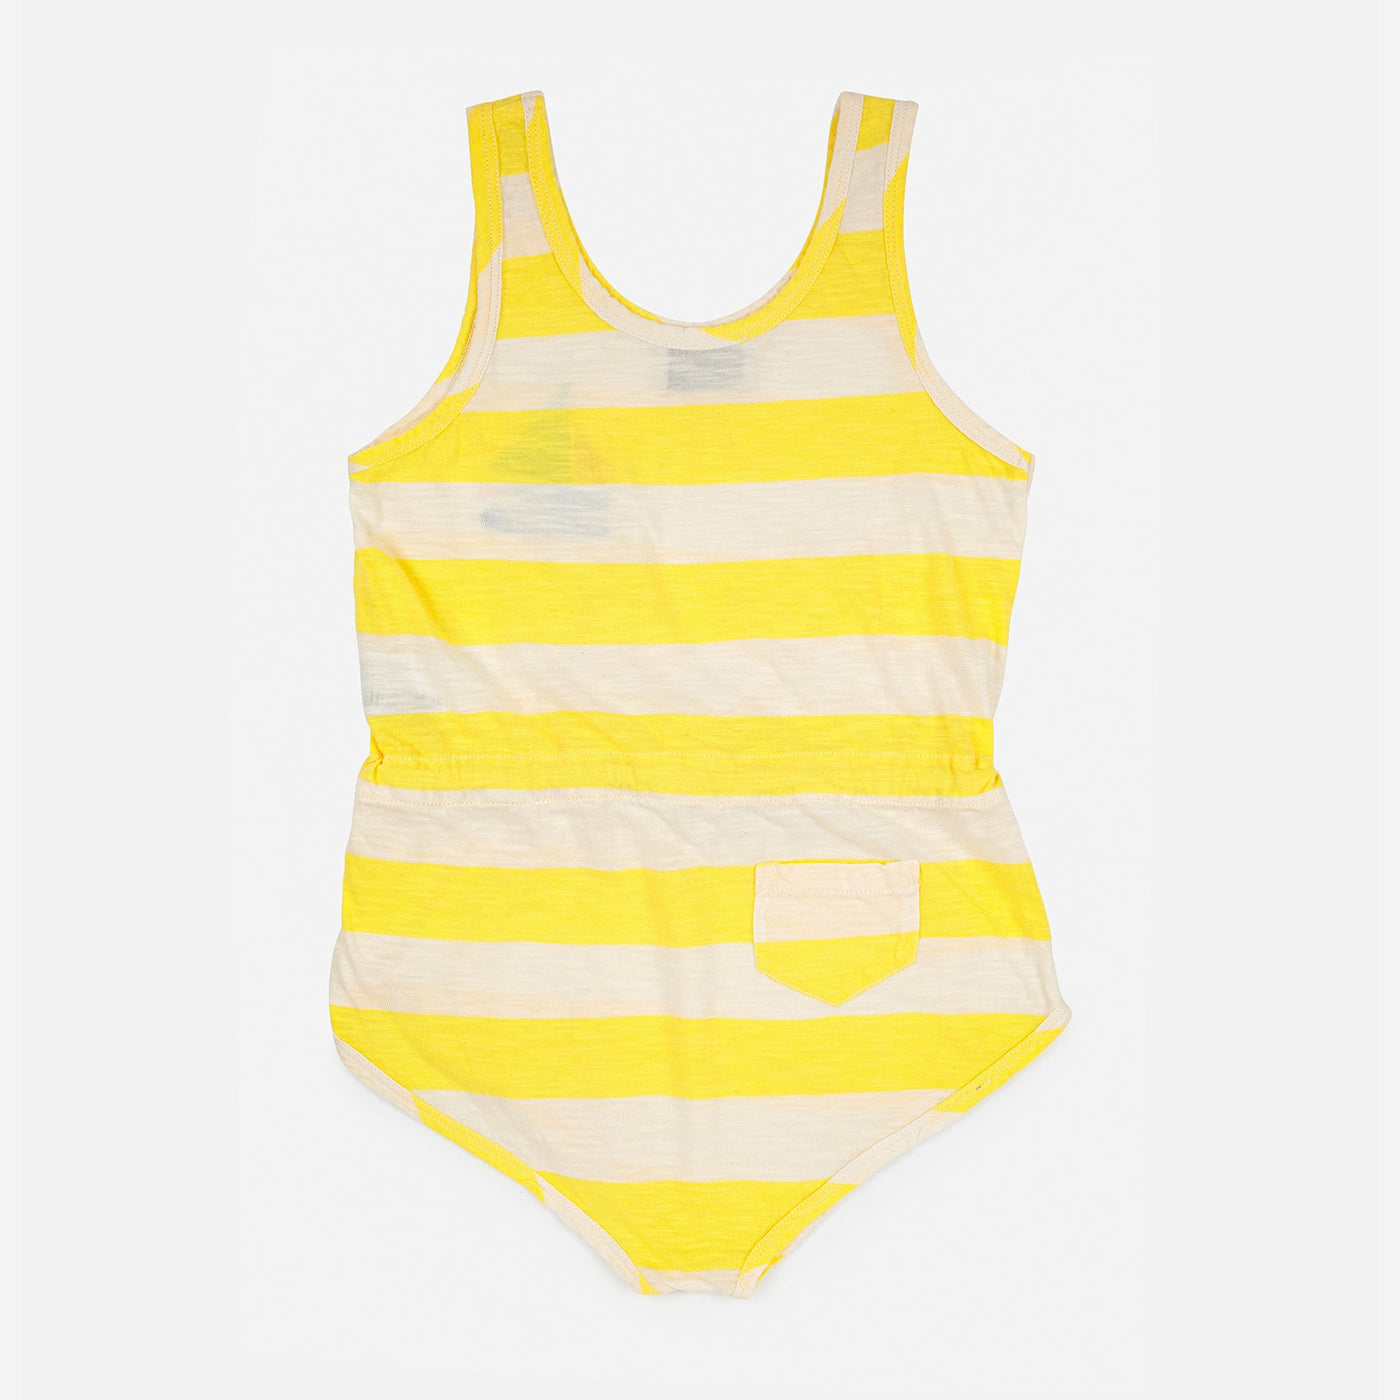 Yellow Stripes Playsuit by Bobo Choses - Petite Belle